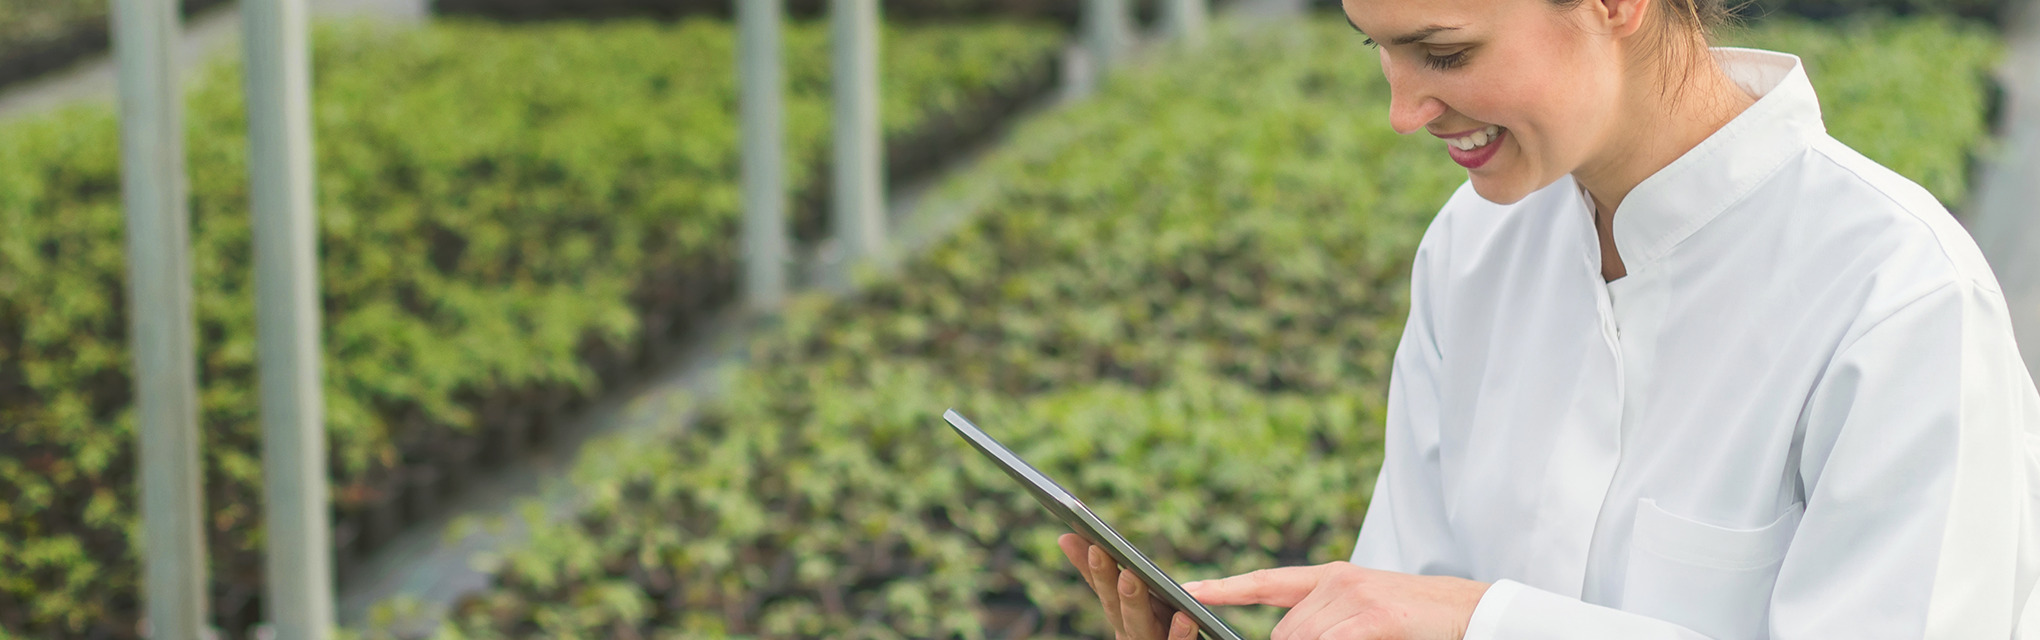 A woman in a white coat holding a tablet in a garden, representing sustainability and conscious consumerism solutions.